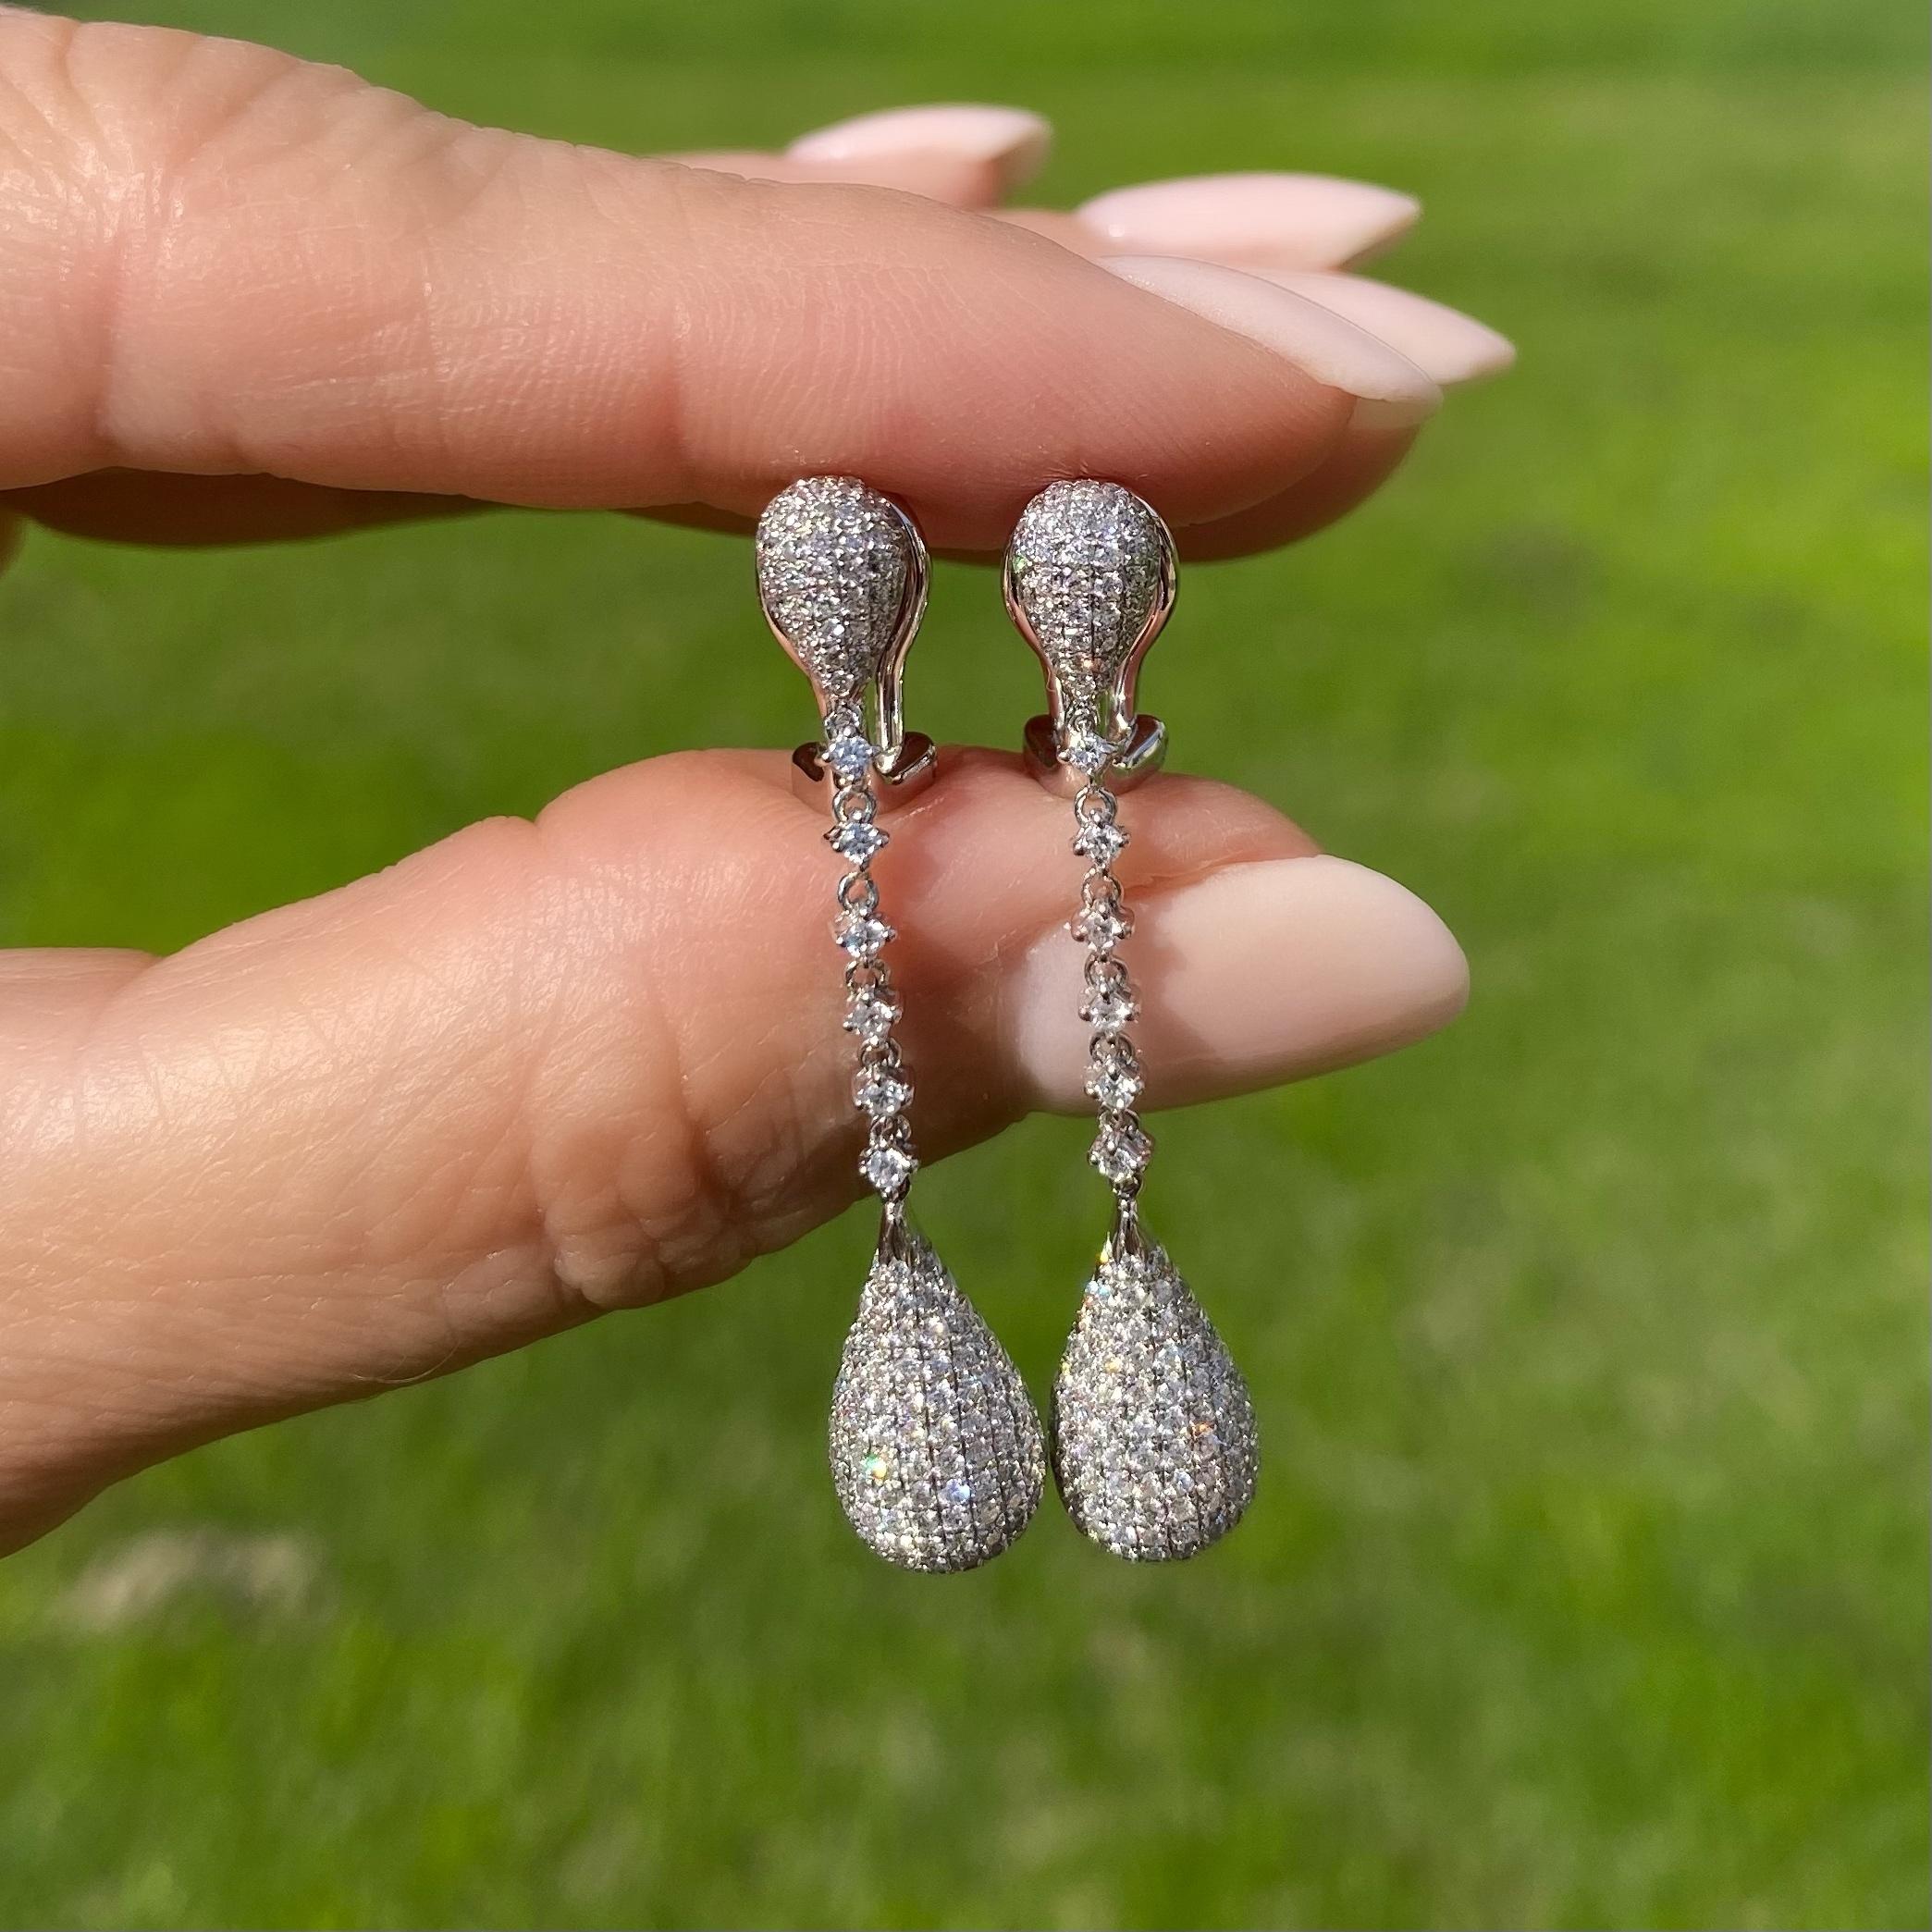 Simply Beautiful and Stylish Pave Diamond White Gold Drop Earrings. Each Dangle Earring Hand set with Diamonds weighing approx. 1.80 Carat total weight. Each earring measuring approx. 1.75” l x